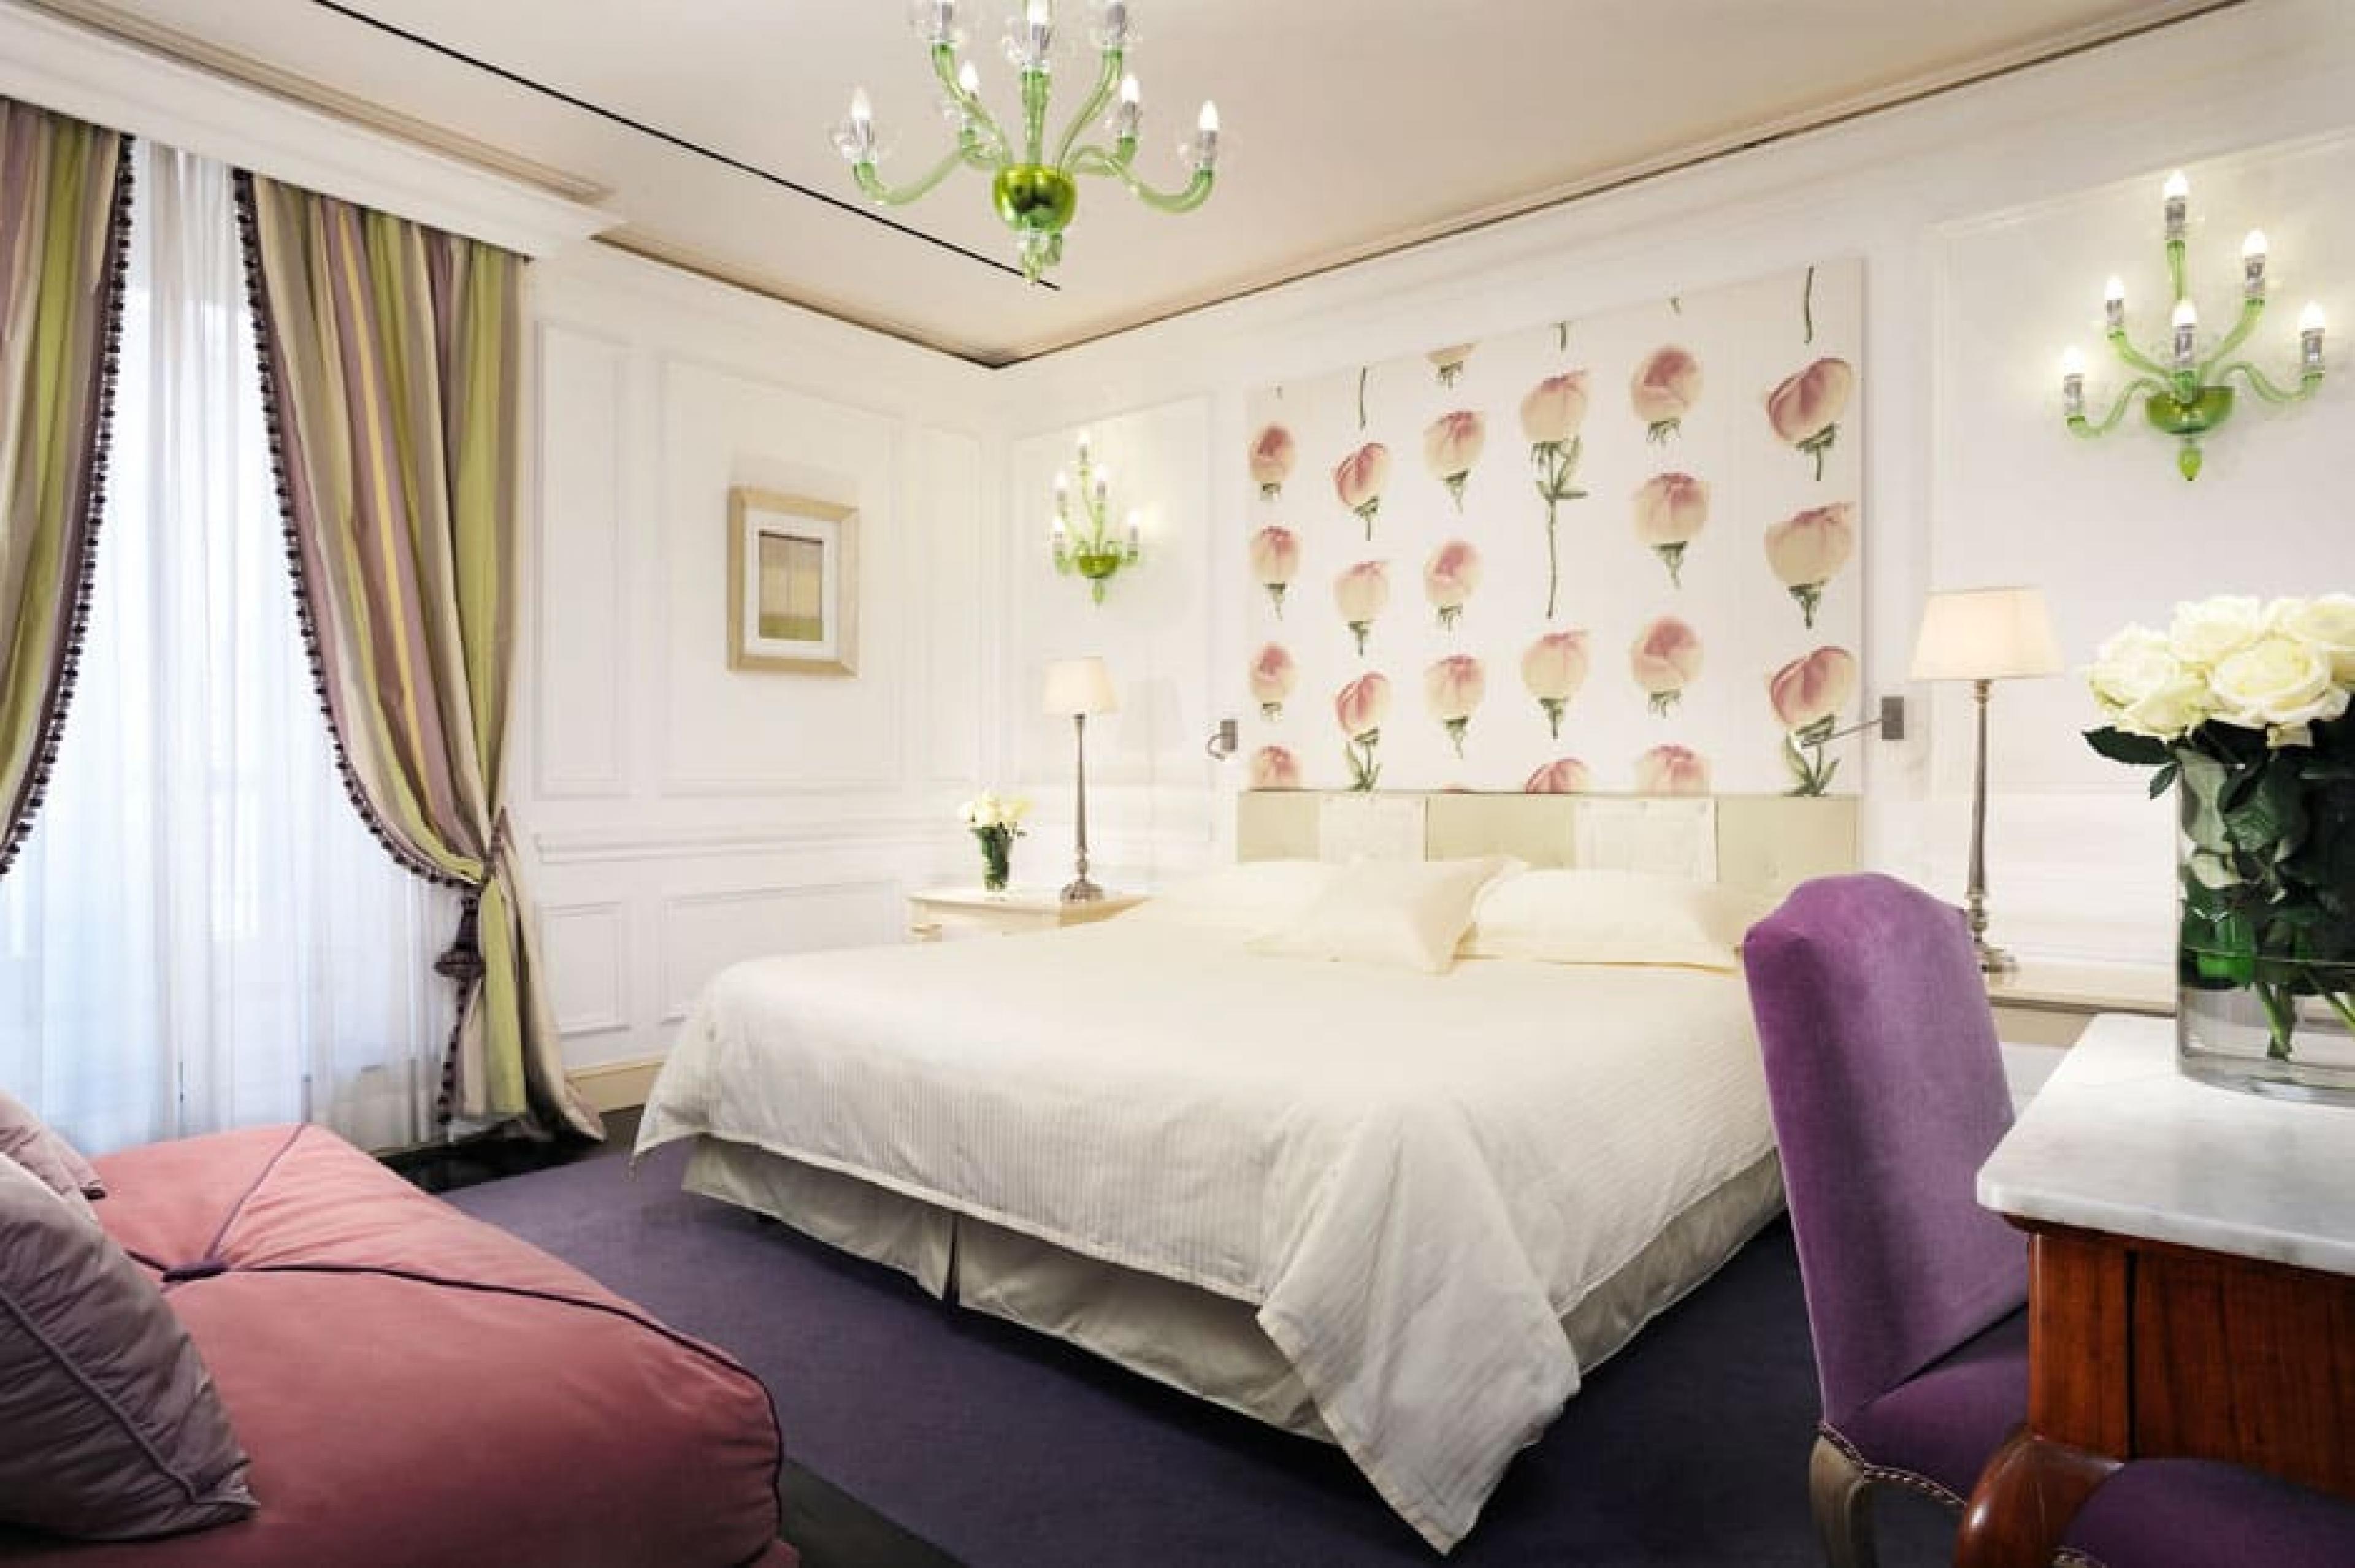 Suite at Hotel d’Inghilterra, Rome, Italy